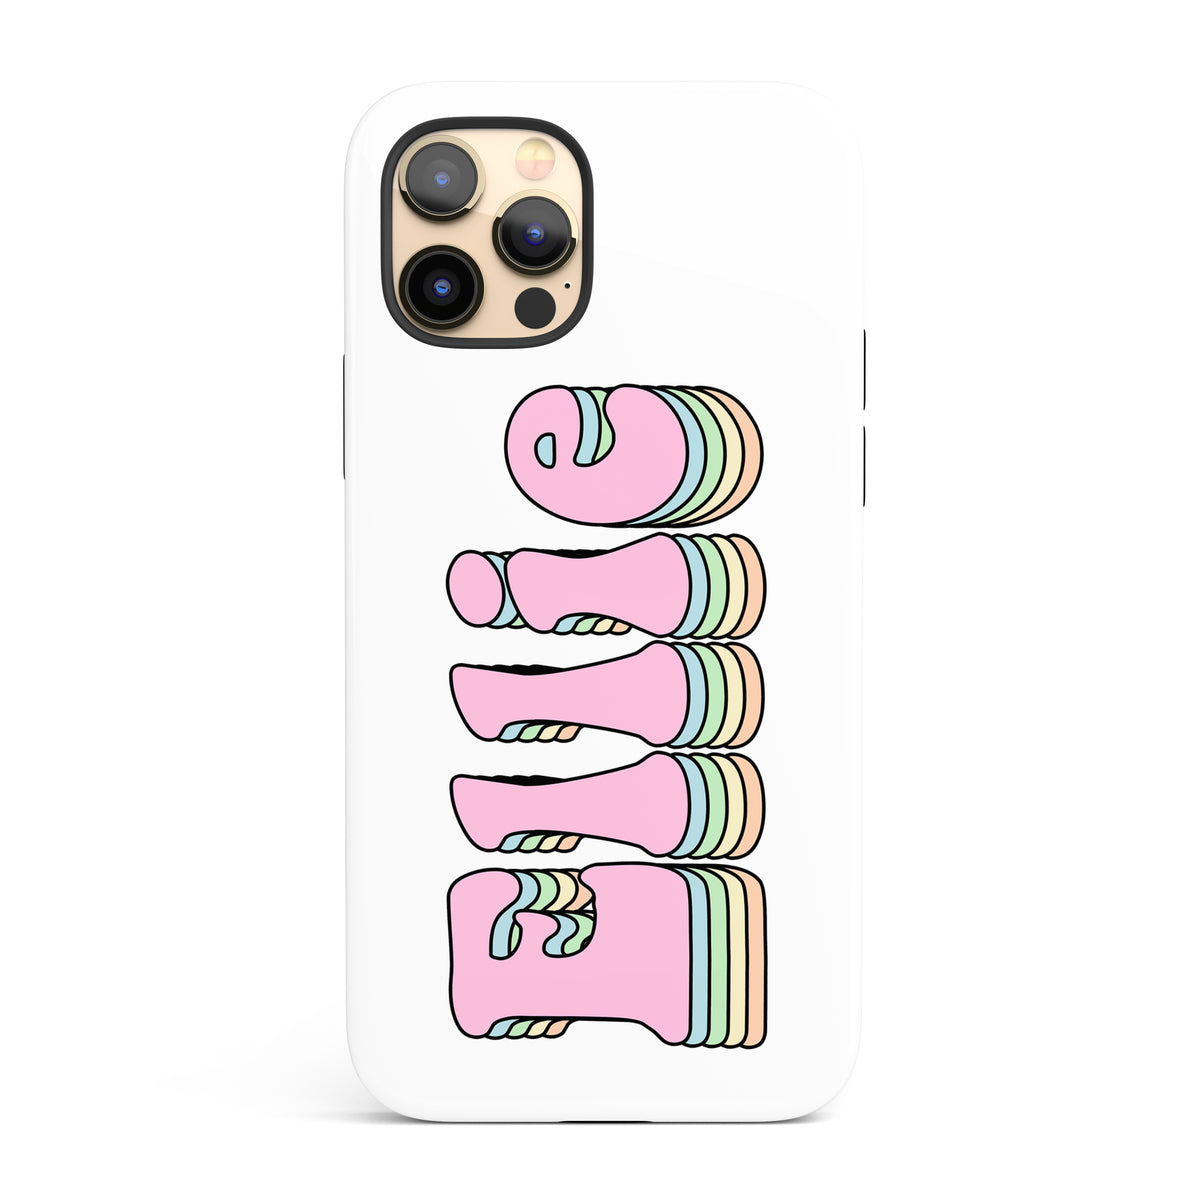 The Personalised Rainbow Case